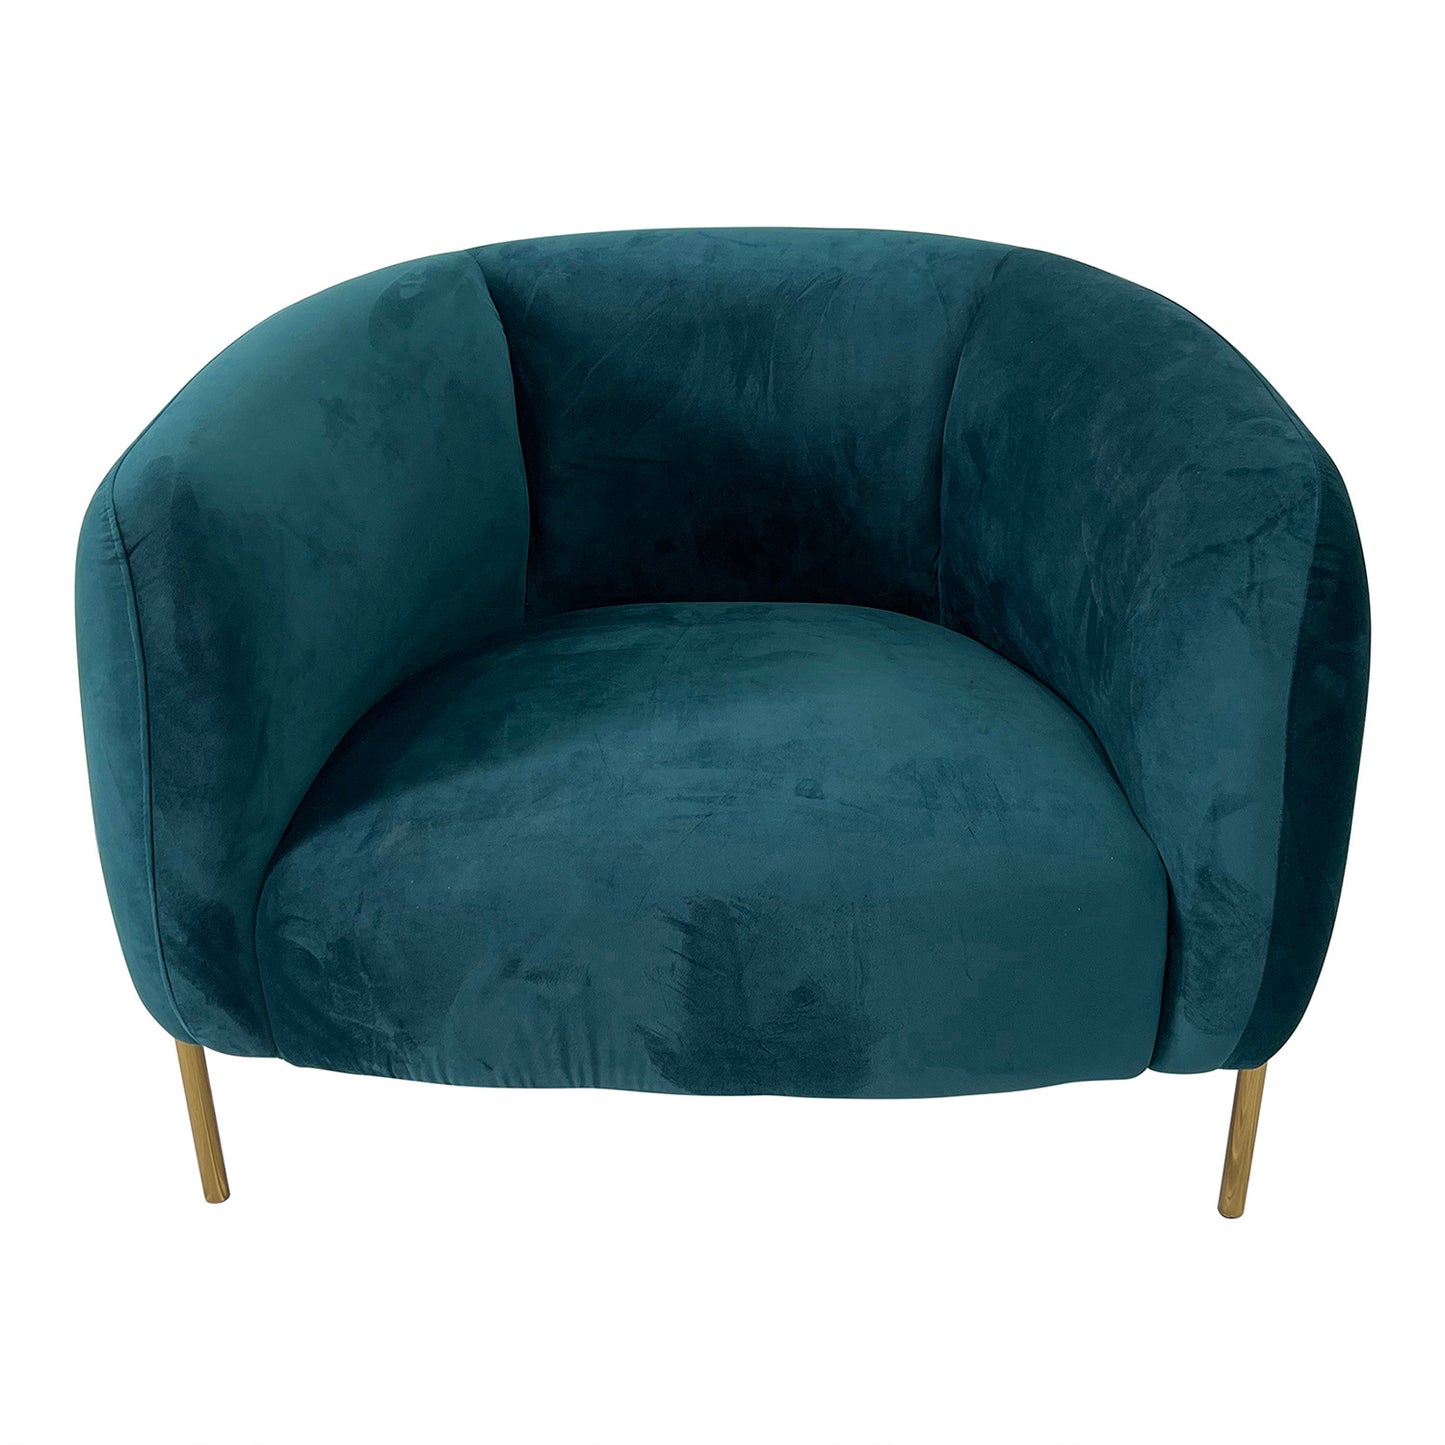 Navy Teal and Gold Sofa Chair - Enova Luxe Home Store